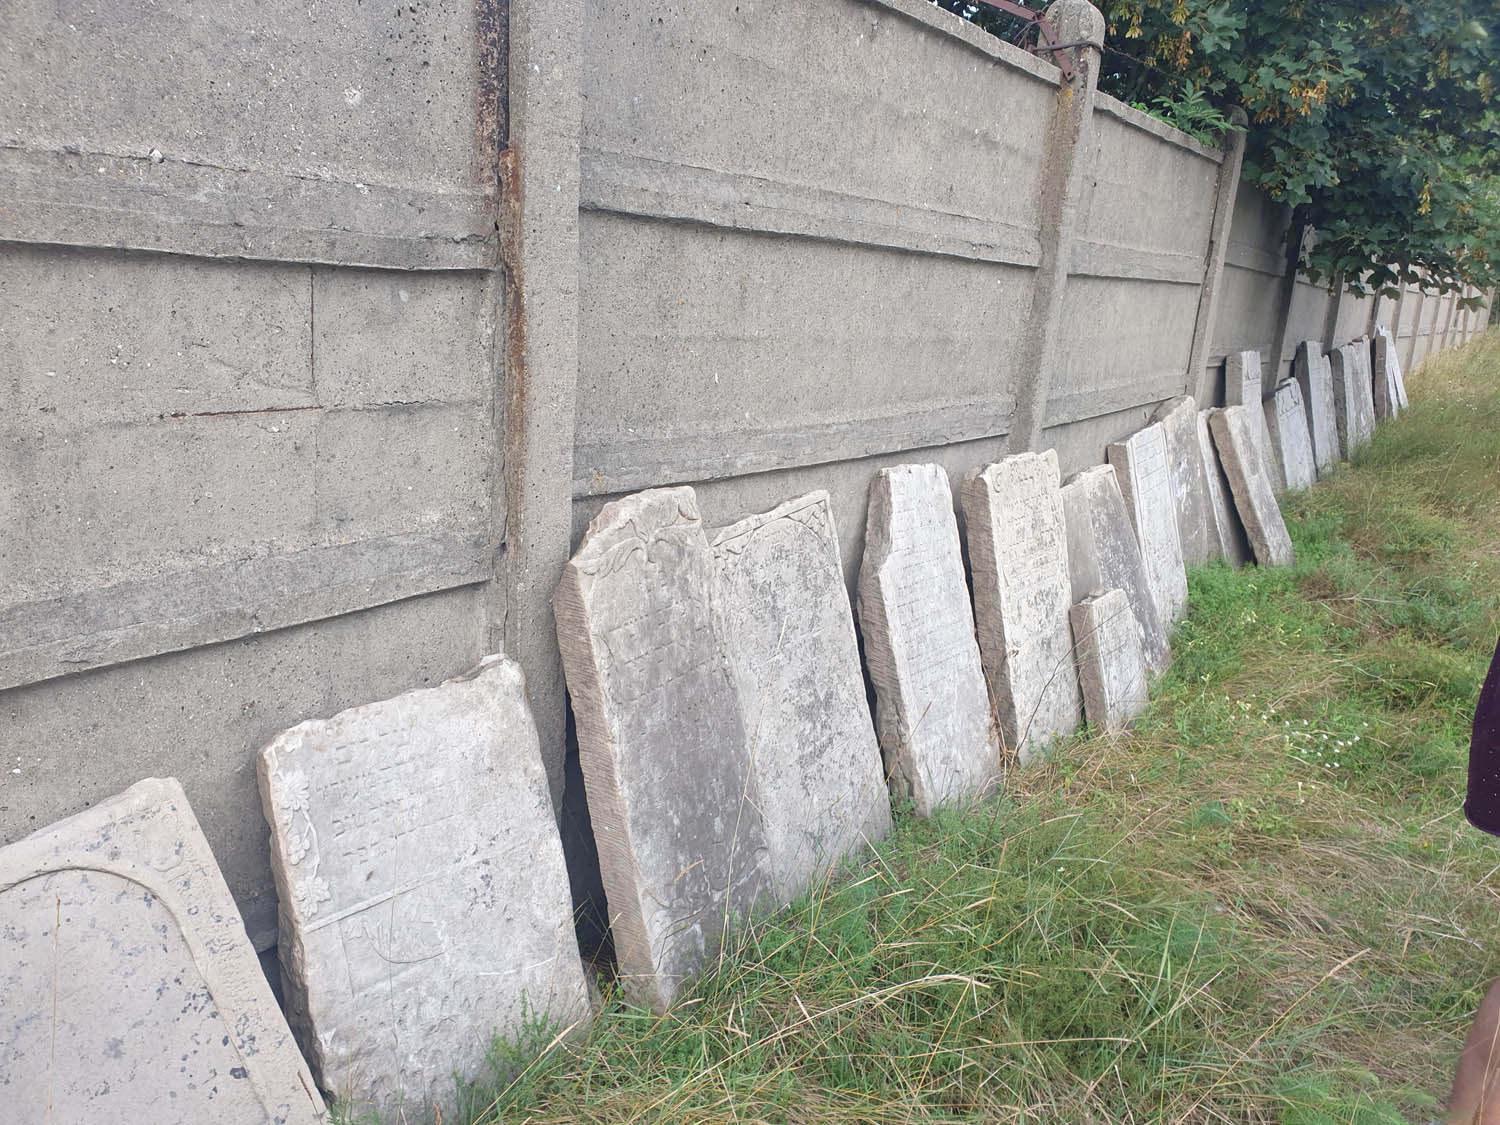 Trip to the former shtetl Widawa (cemetery)